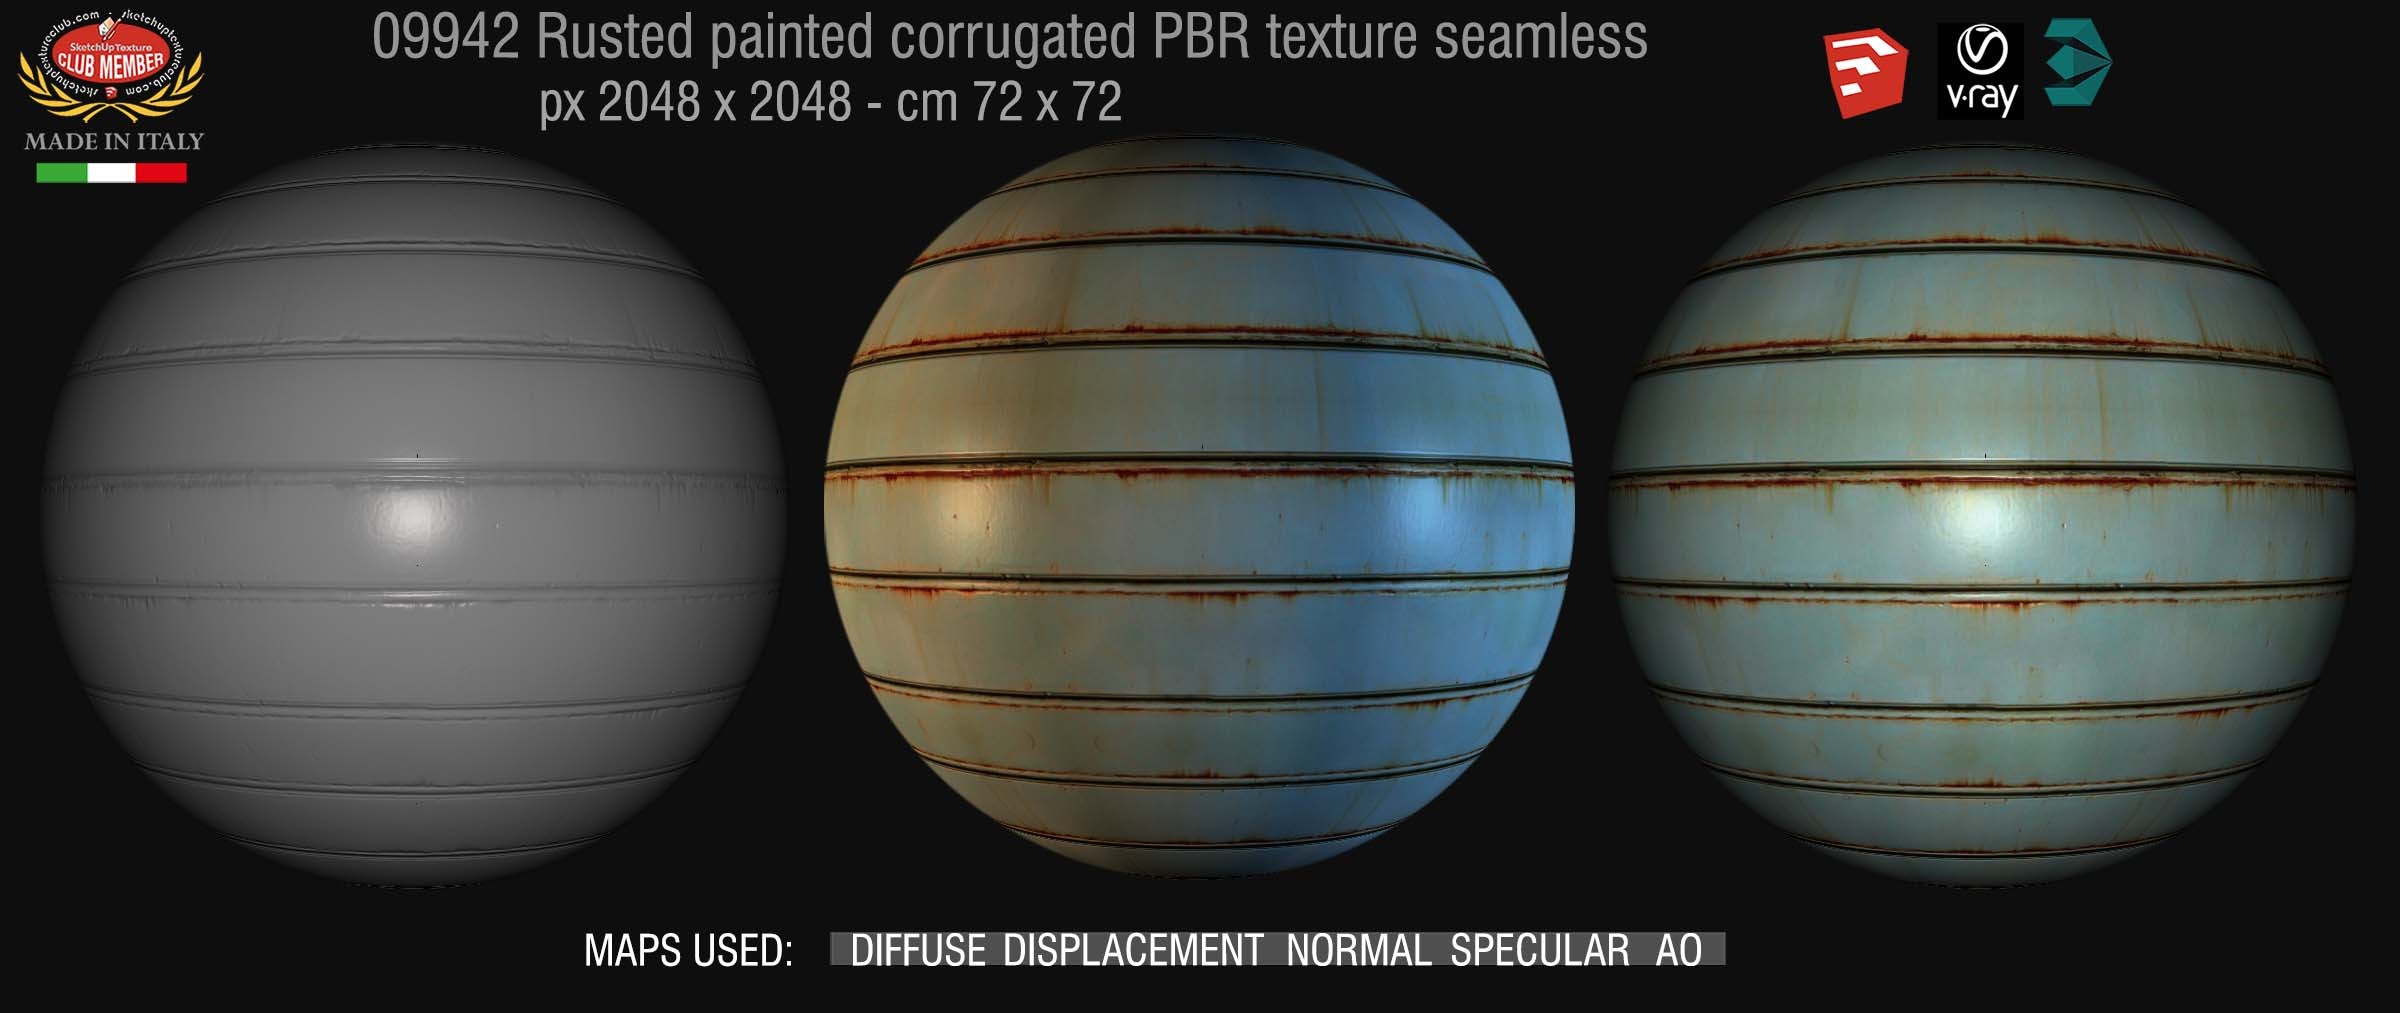 09942 Rusted painted corrugated metal PBR texture seamless DEMO